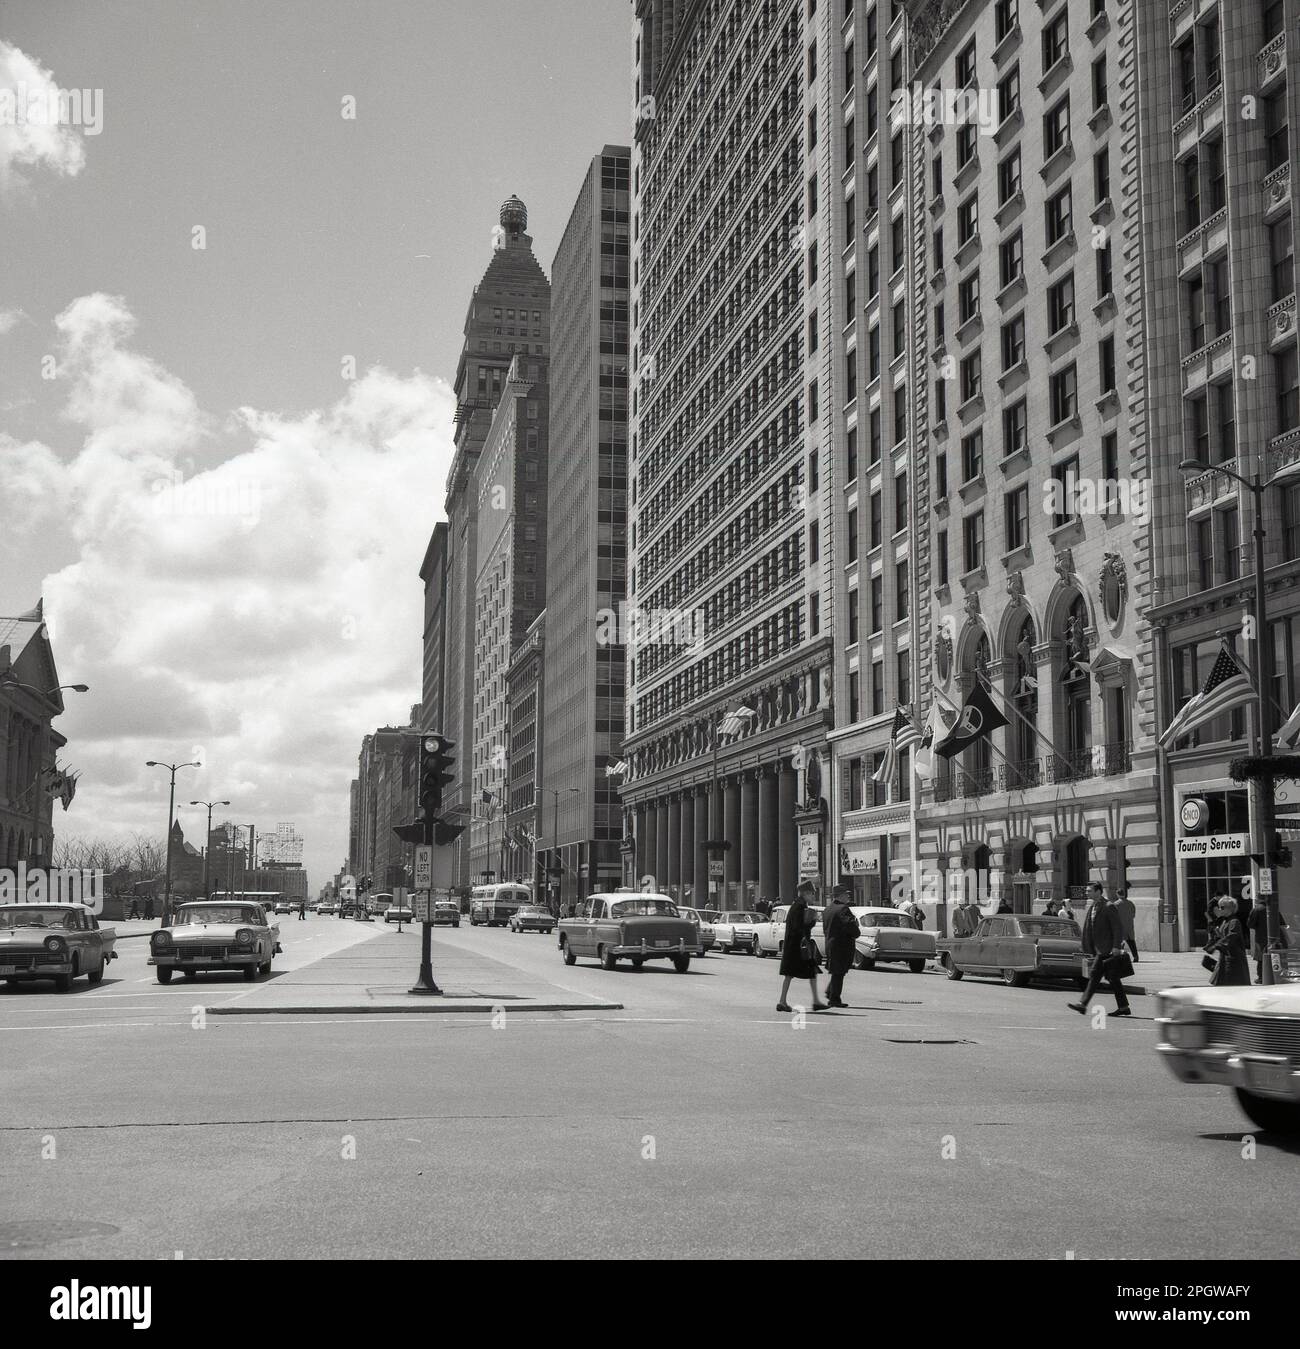 1960s, historical, a view from this era of North MIchigan Ave, Chicago, Illinois, USA, a famous street known as 'The Magnificent MIle' in downtown. Stock Photo